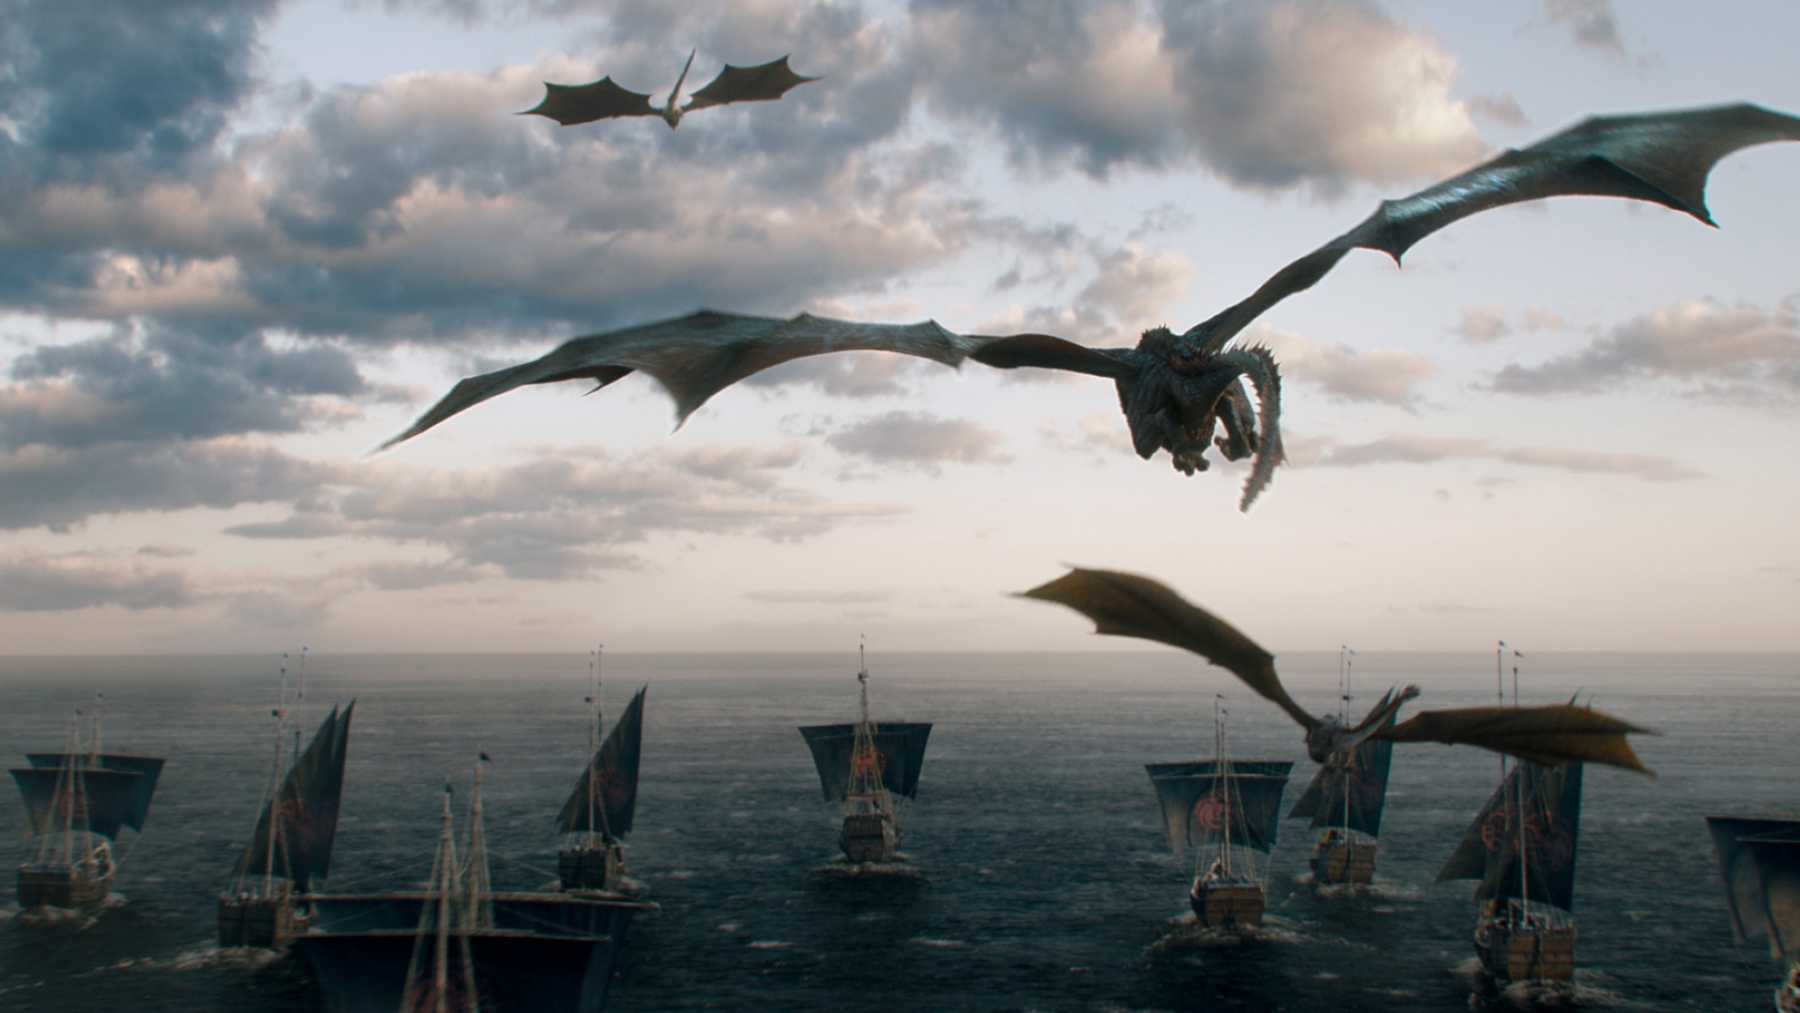 713903 - Game Of Thrones Dragons Flying - HD Wallpaper 